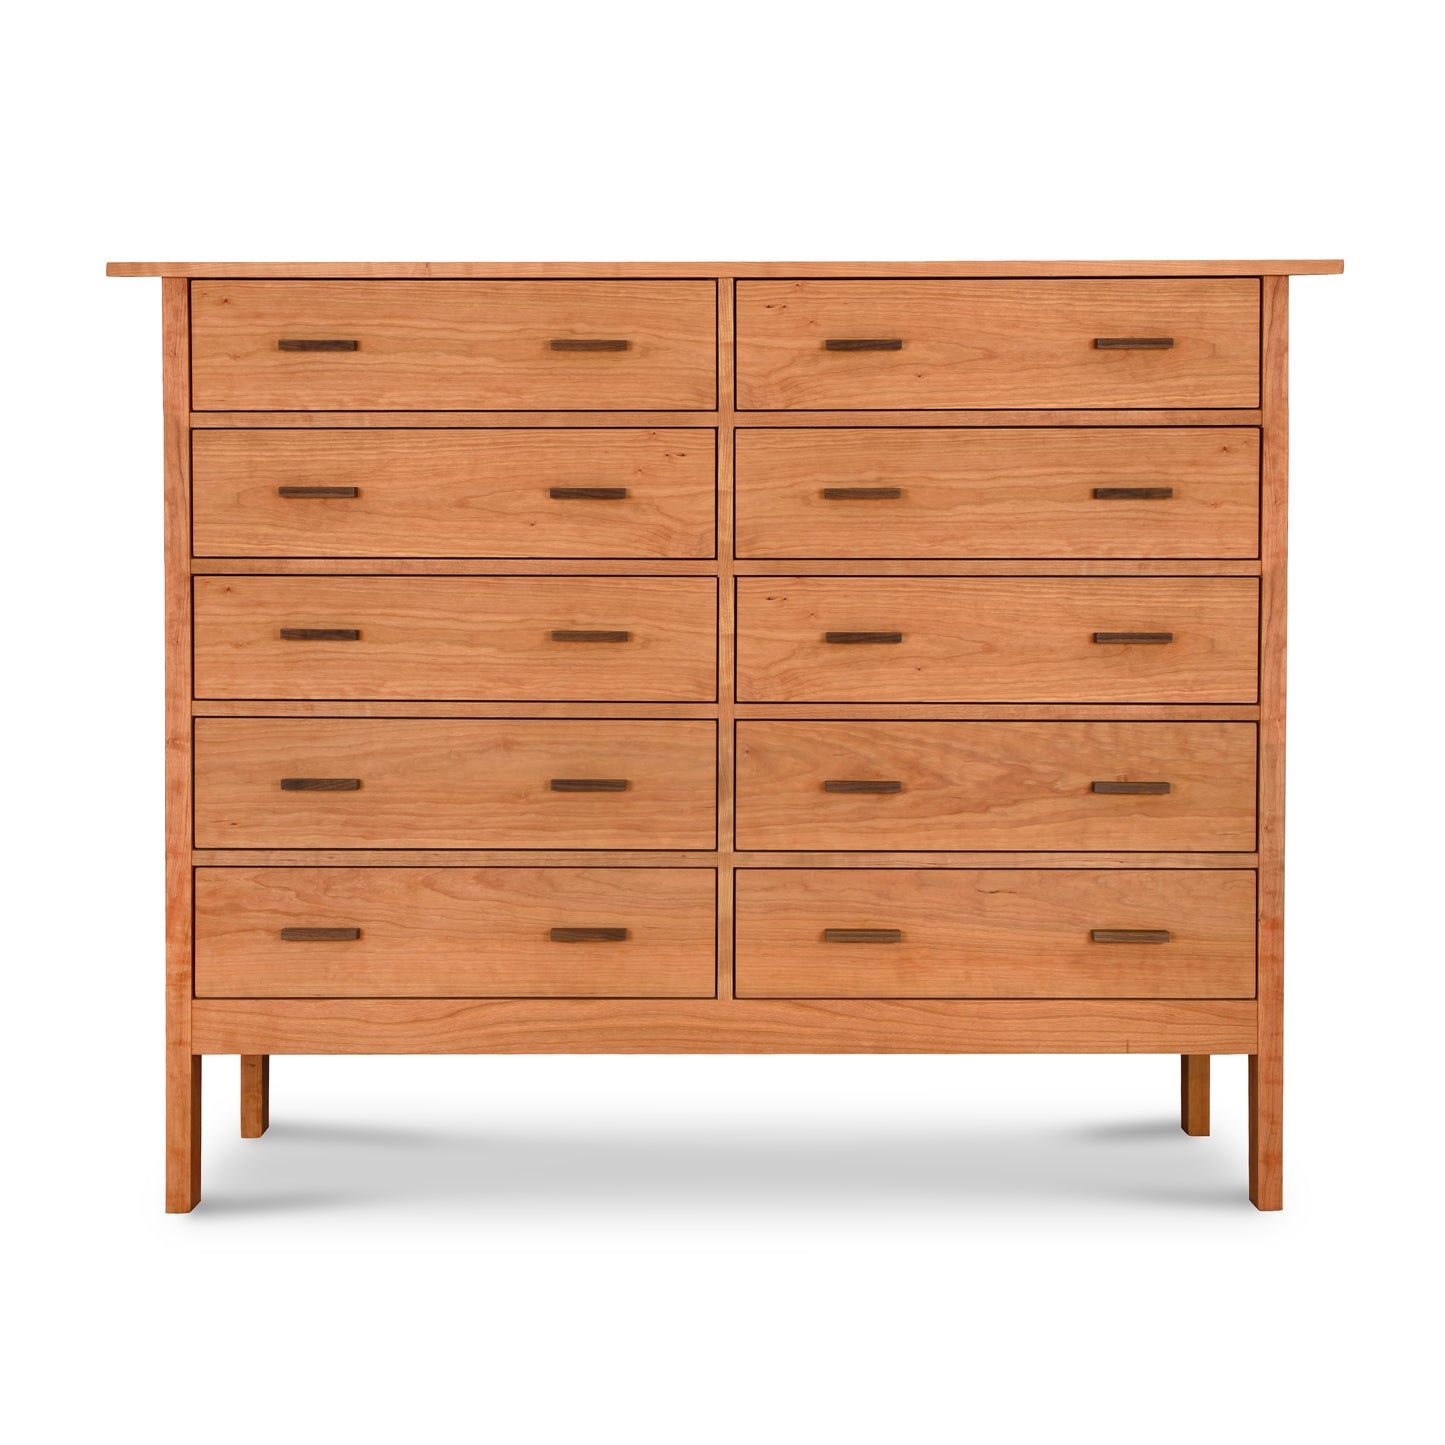 A Vermont Furniture Designs Modern Craftsman 10-Drawer Dresser, isolated on a white background, perfect for bedroom storage.